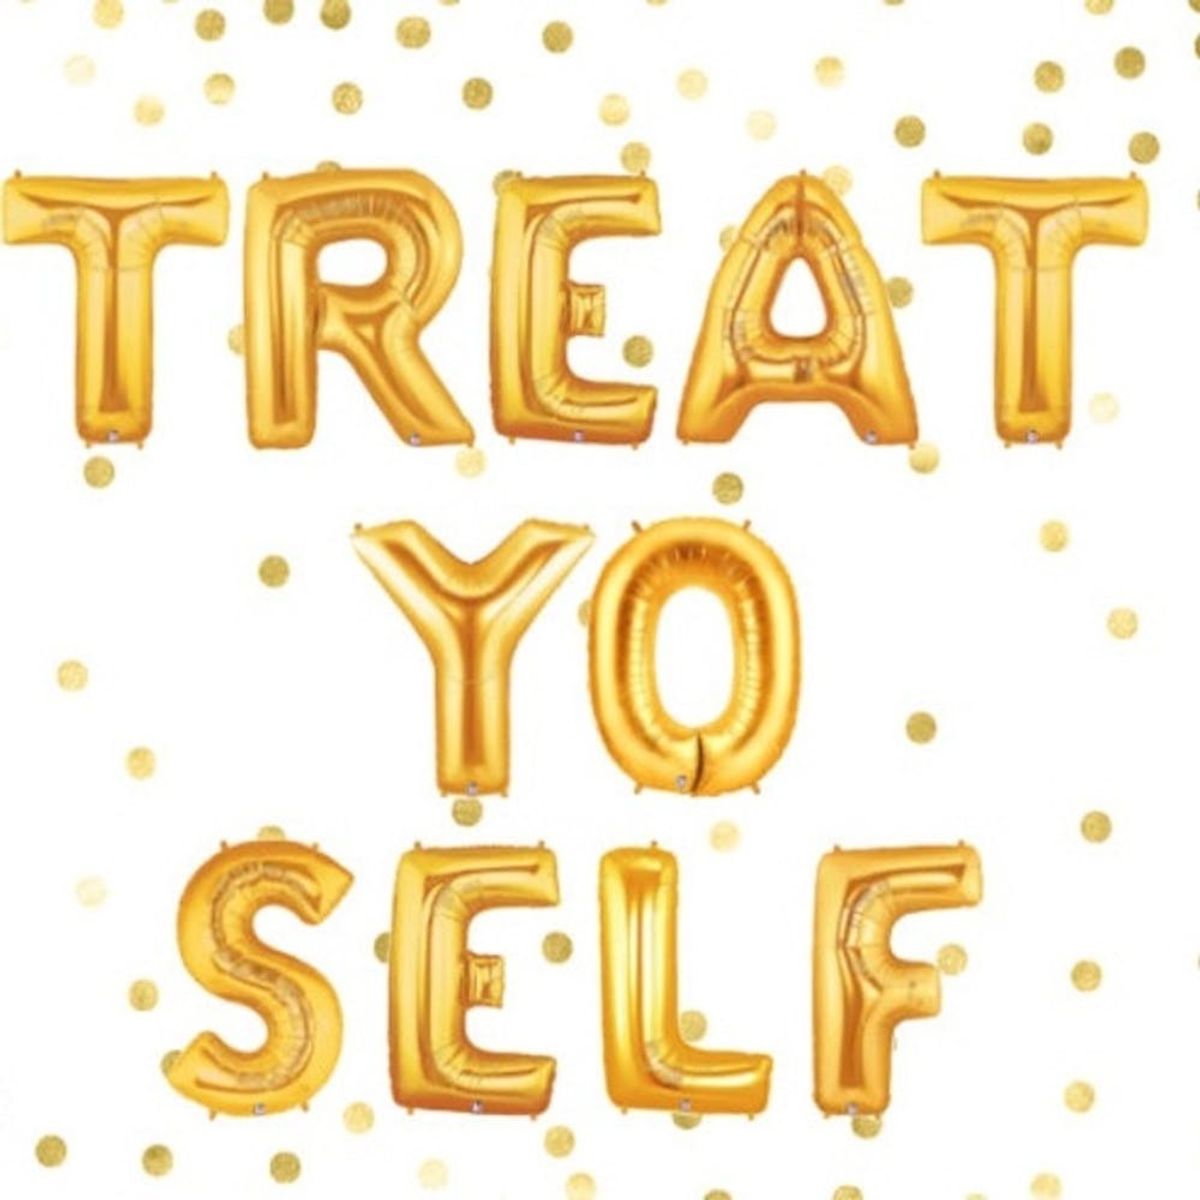 You Deserve to Truly Treat Yo’ Self and Here Are 20 Ways to Do It